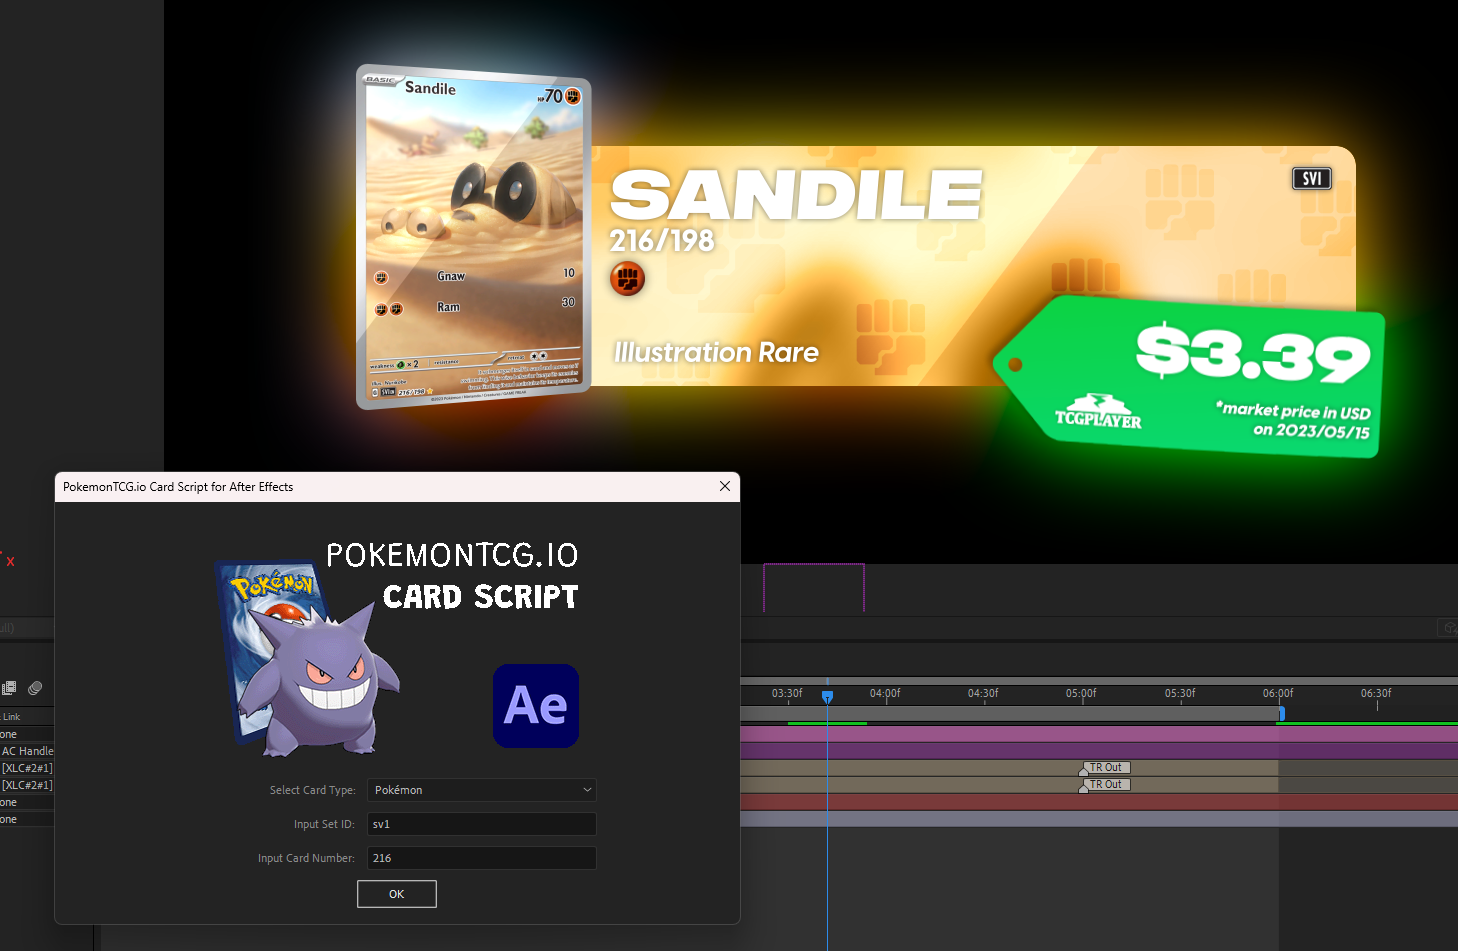 Screenshot of an After Effects project + script.  This creates lower thirds based on API data from pokemontcg.io (Pokémon Card API). I tell the script which card I want to fetch through a prompt and it modifies layers, images and text in the project using that data.

The example here has created a lower third for an Illustration Rare of Sandile from the Scarlet & Violet base set.